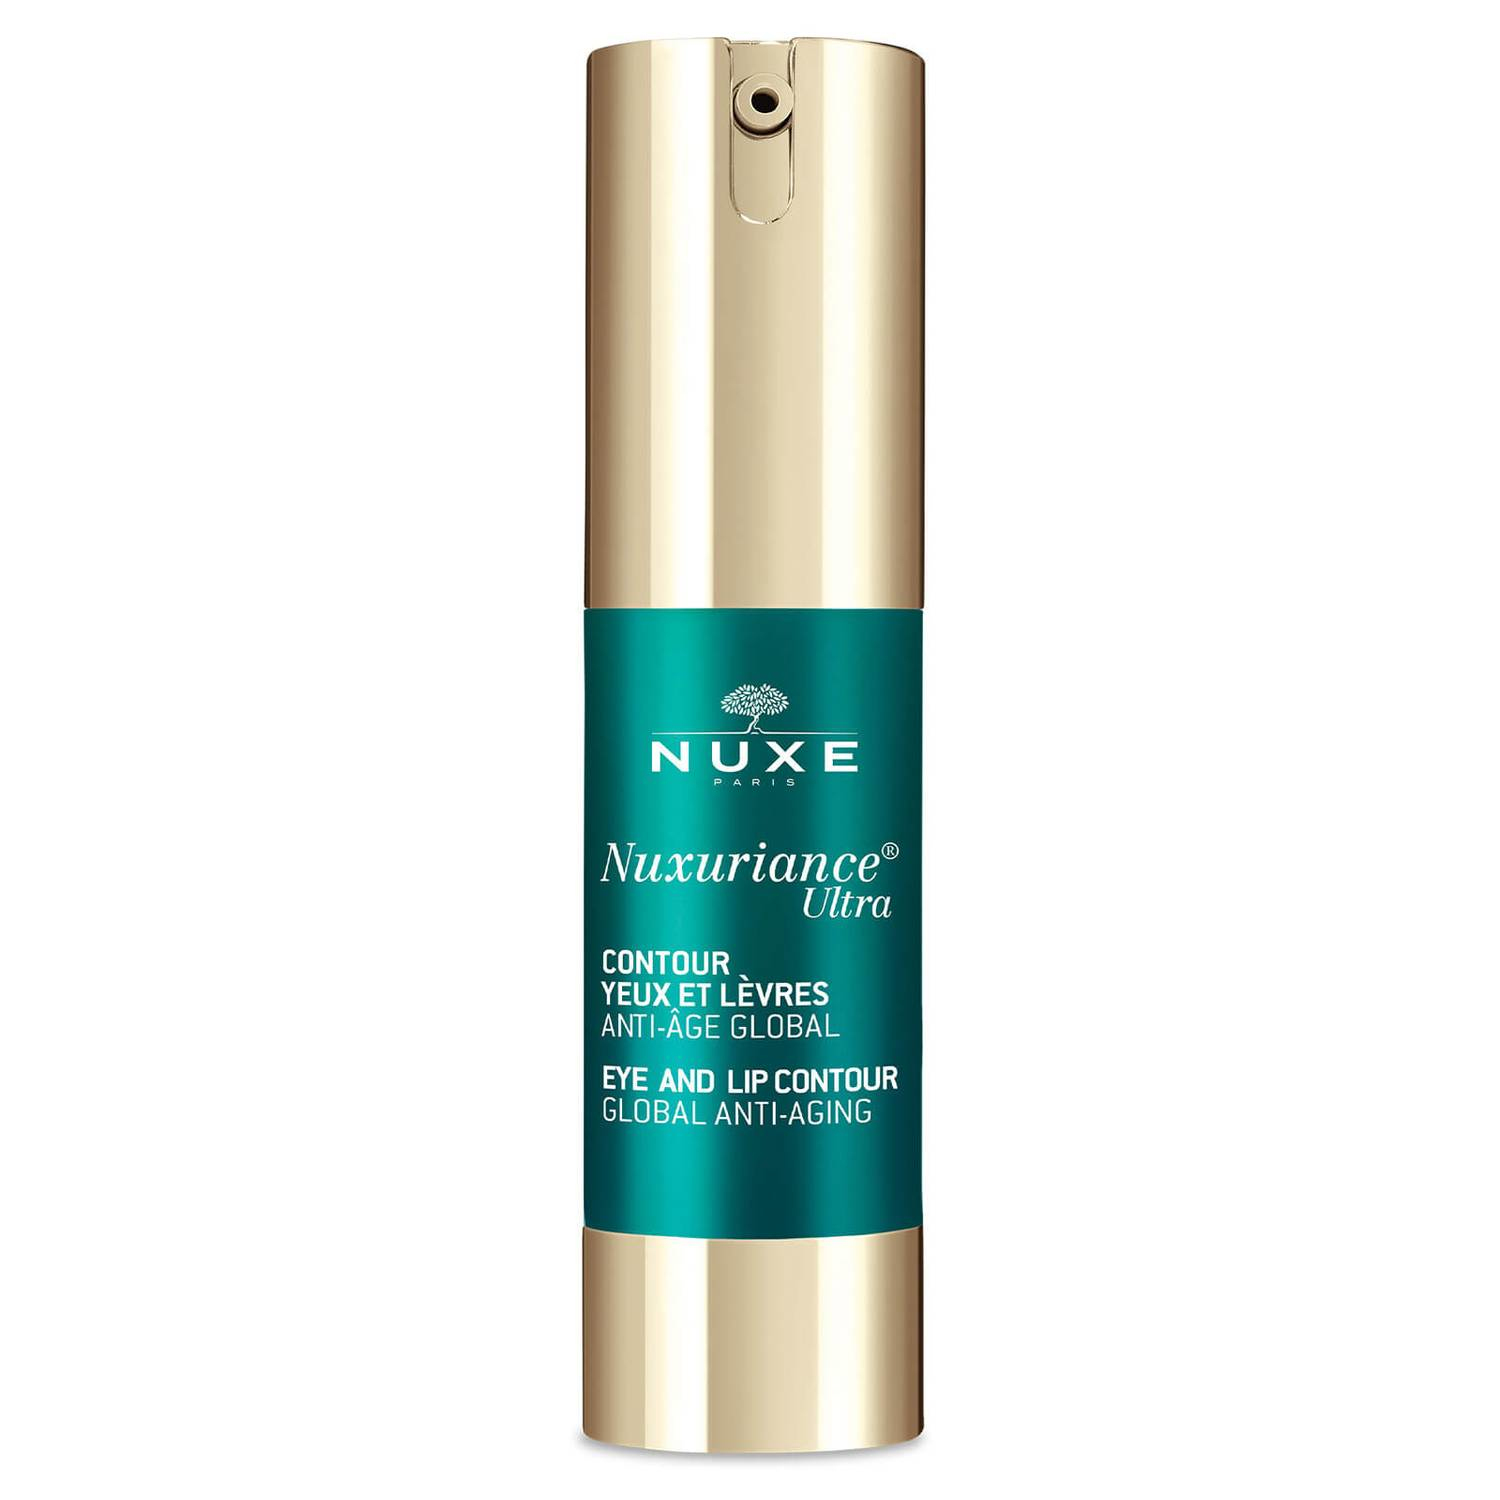 NUXE Nuxeuriance Ultra